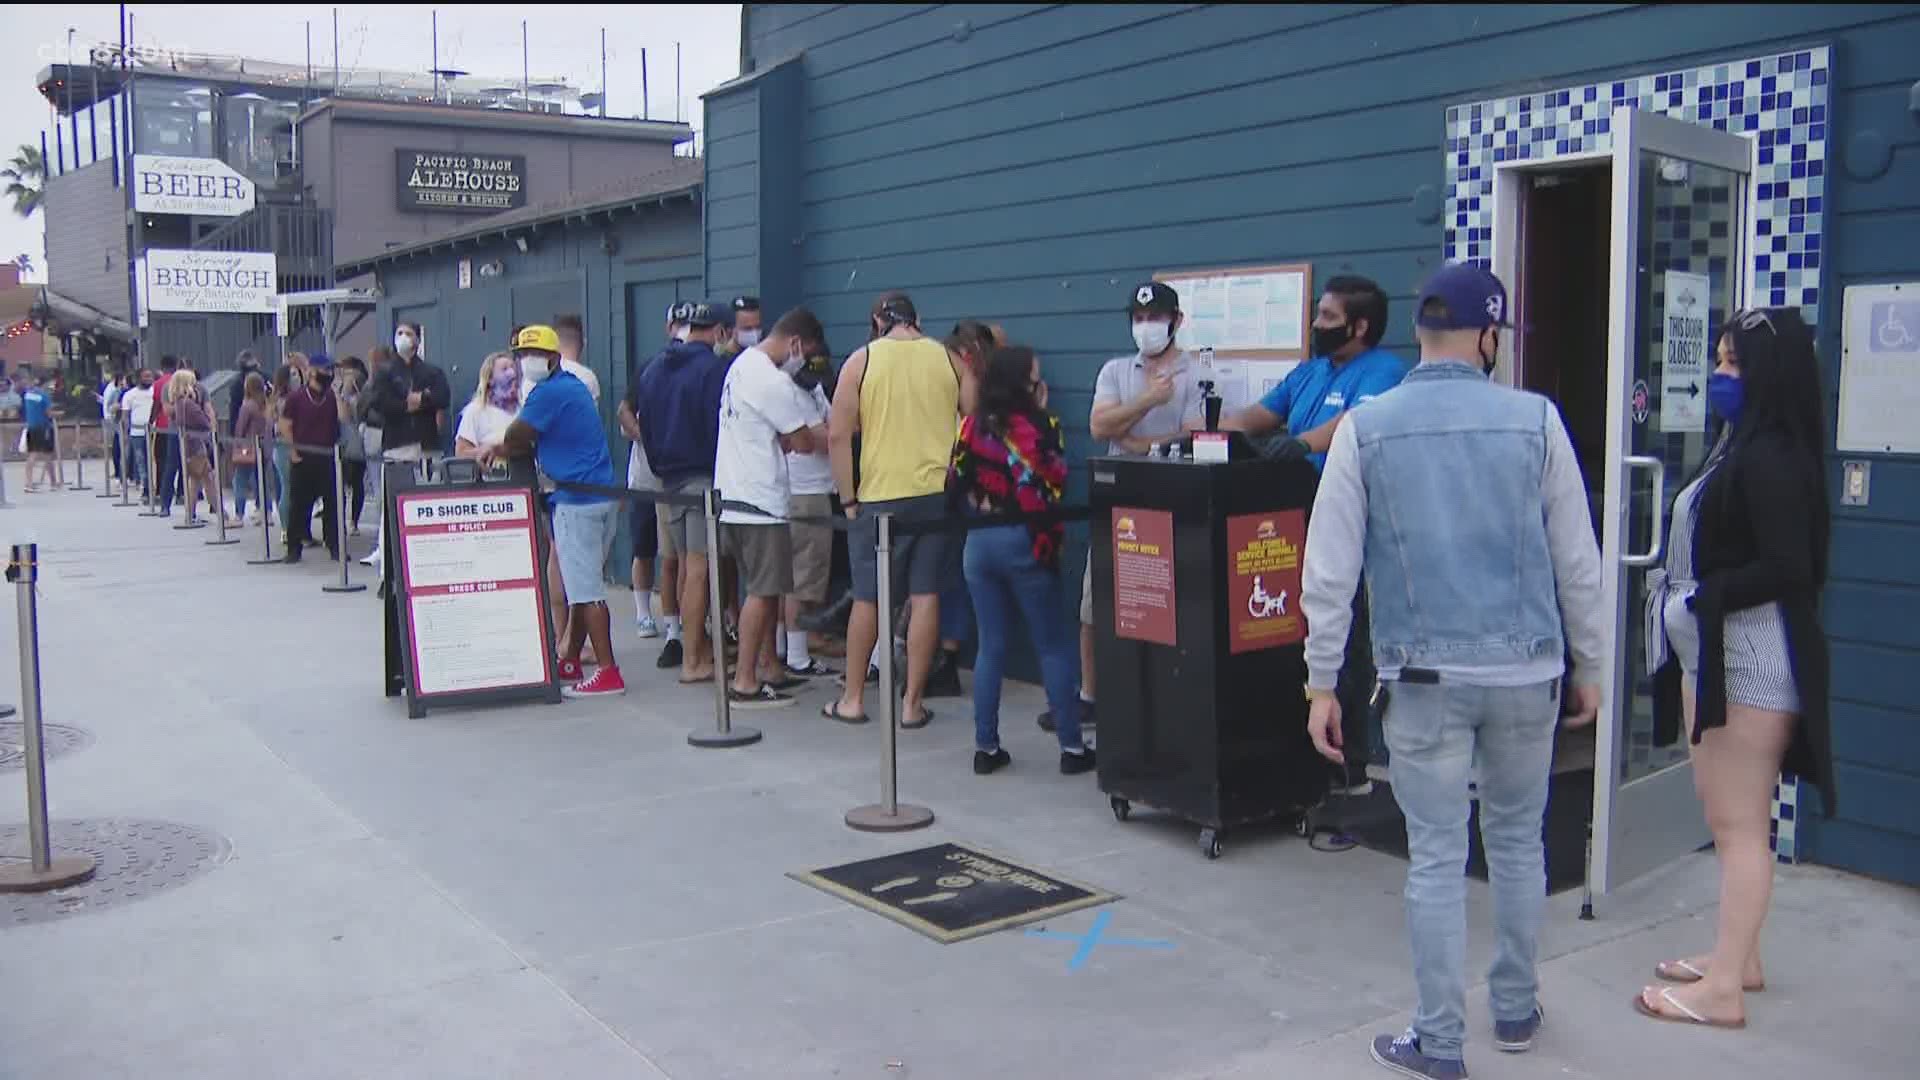 News 8's Abbie Alford reports from Pacific Beach on how long lines have not deterred others from flocking to beach hangouts.